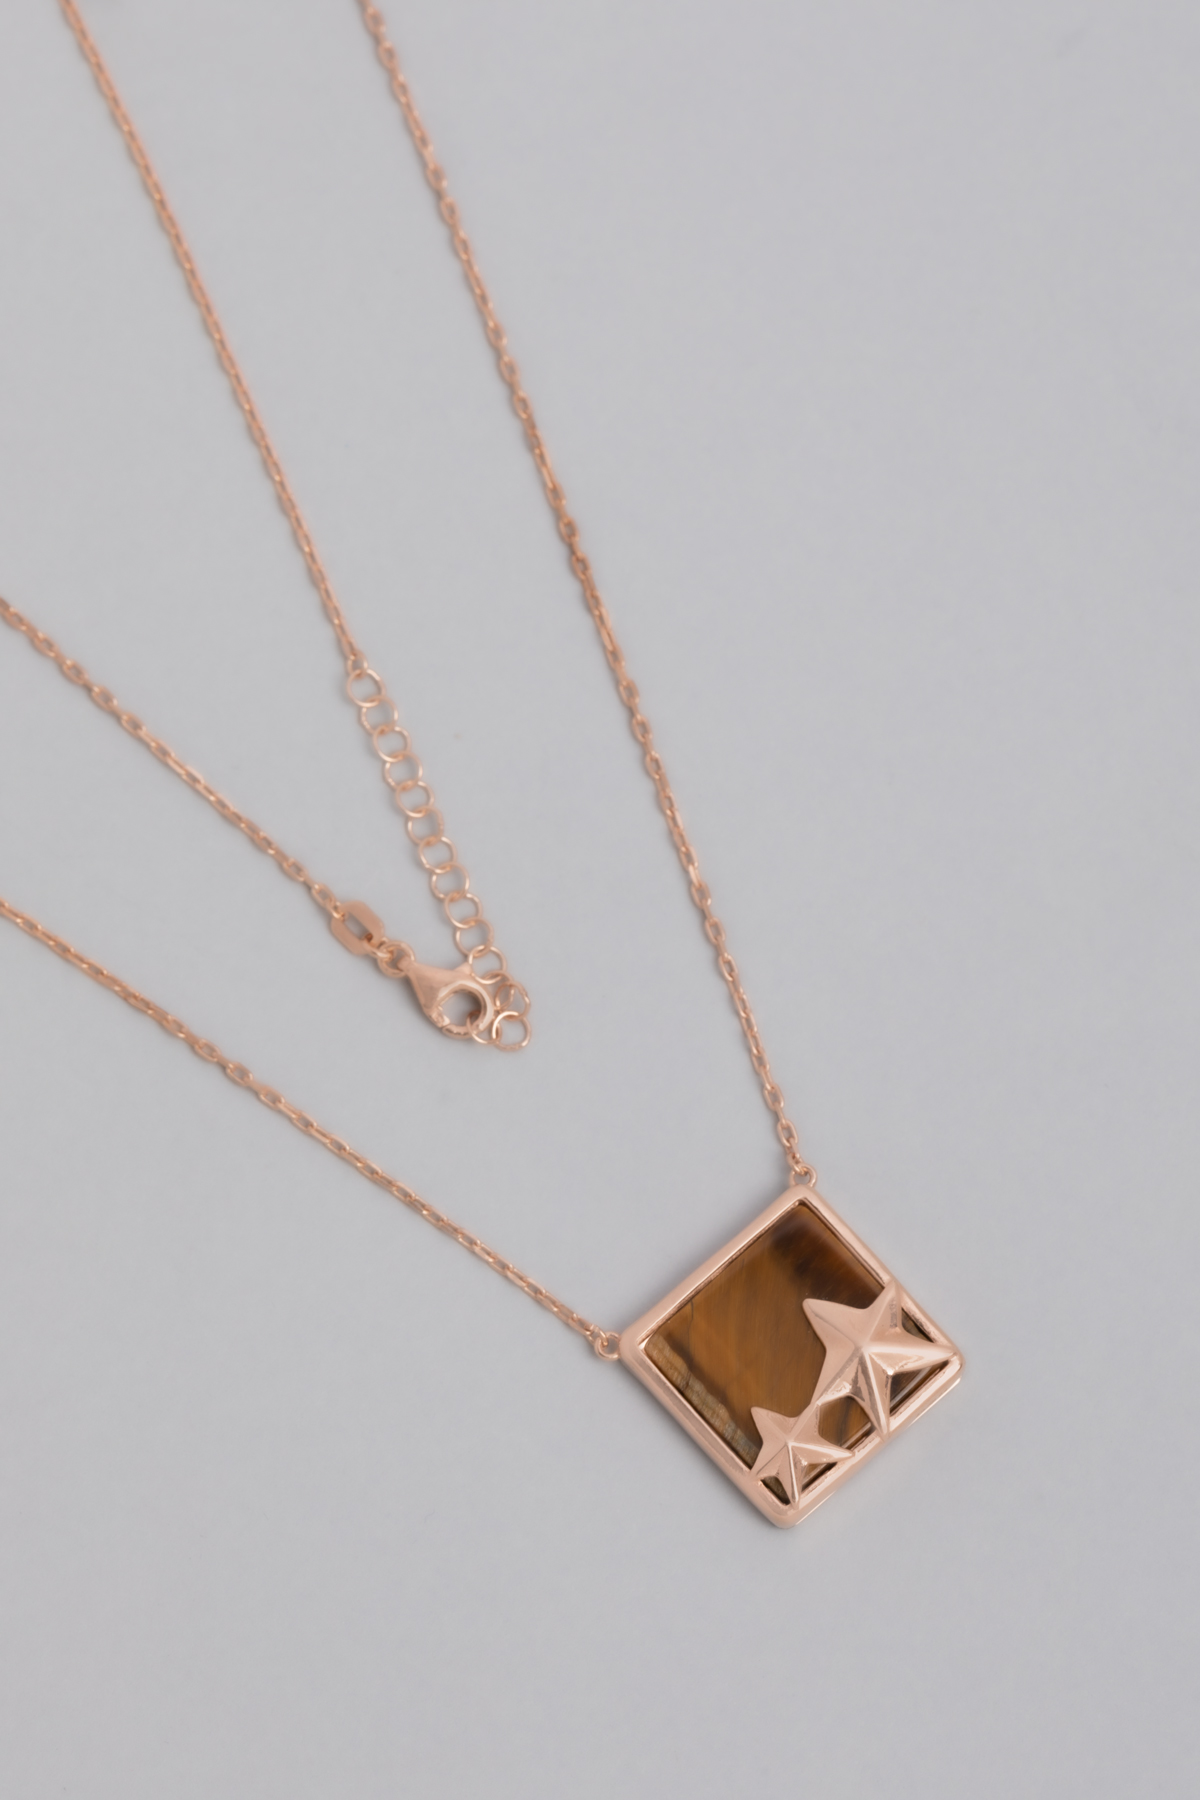 18K Rose Gold Plated Silver Star Necklace with Tiger Eye Stone